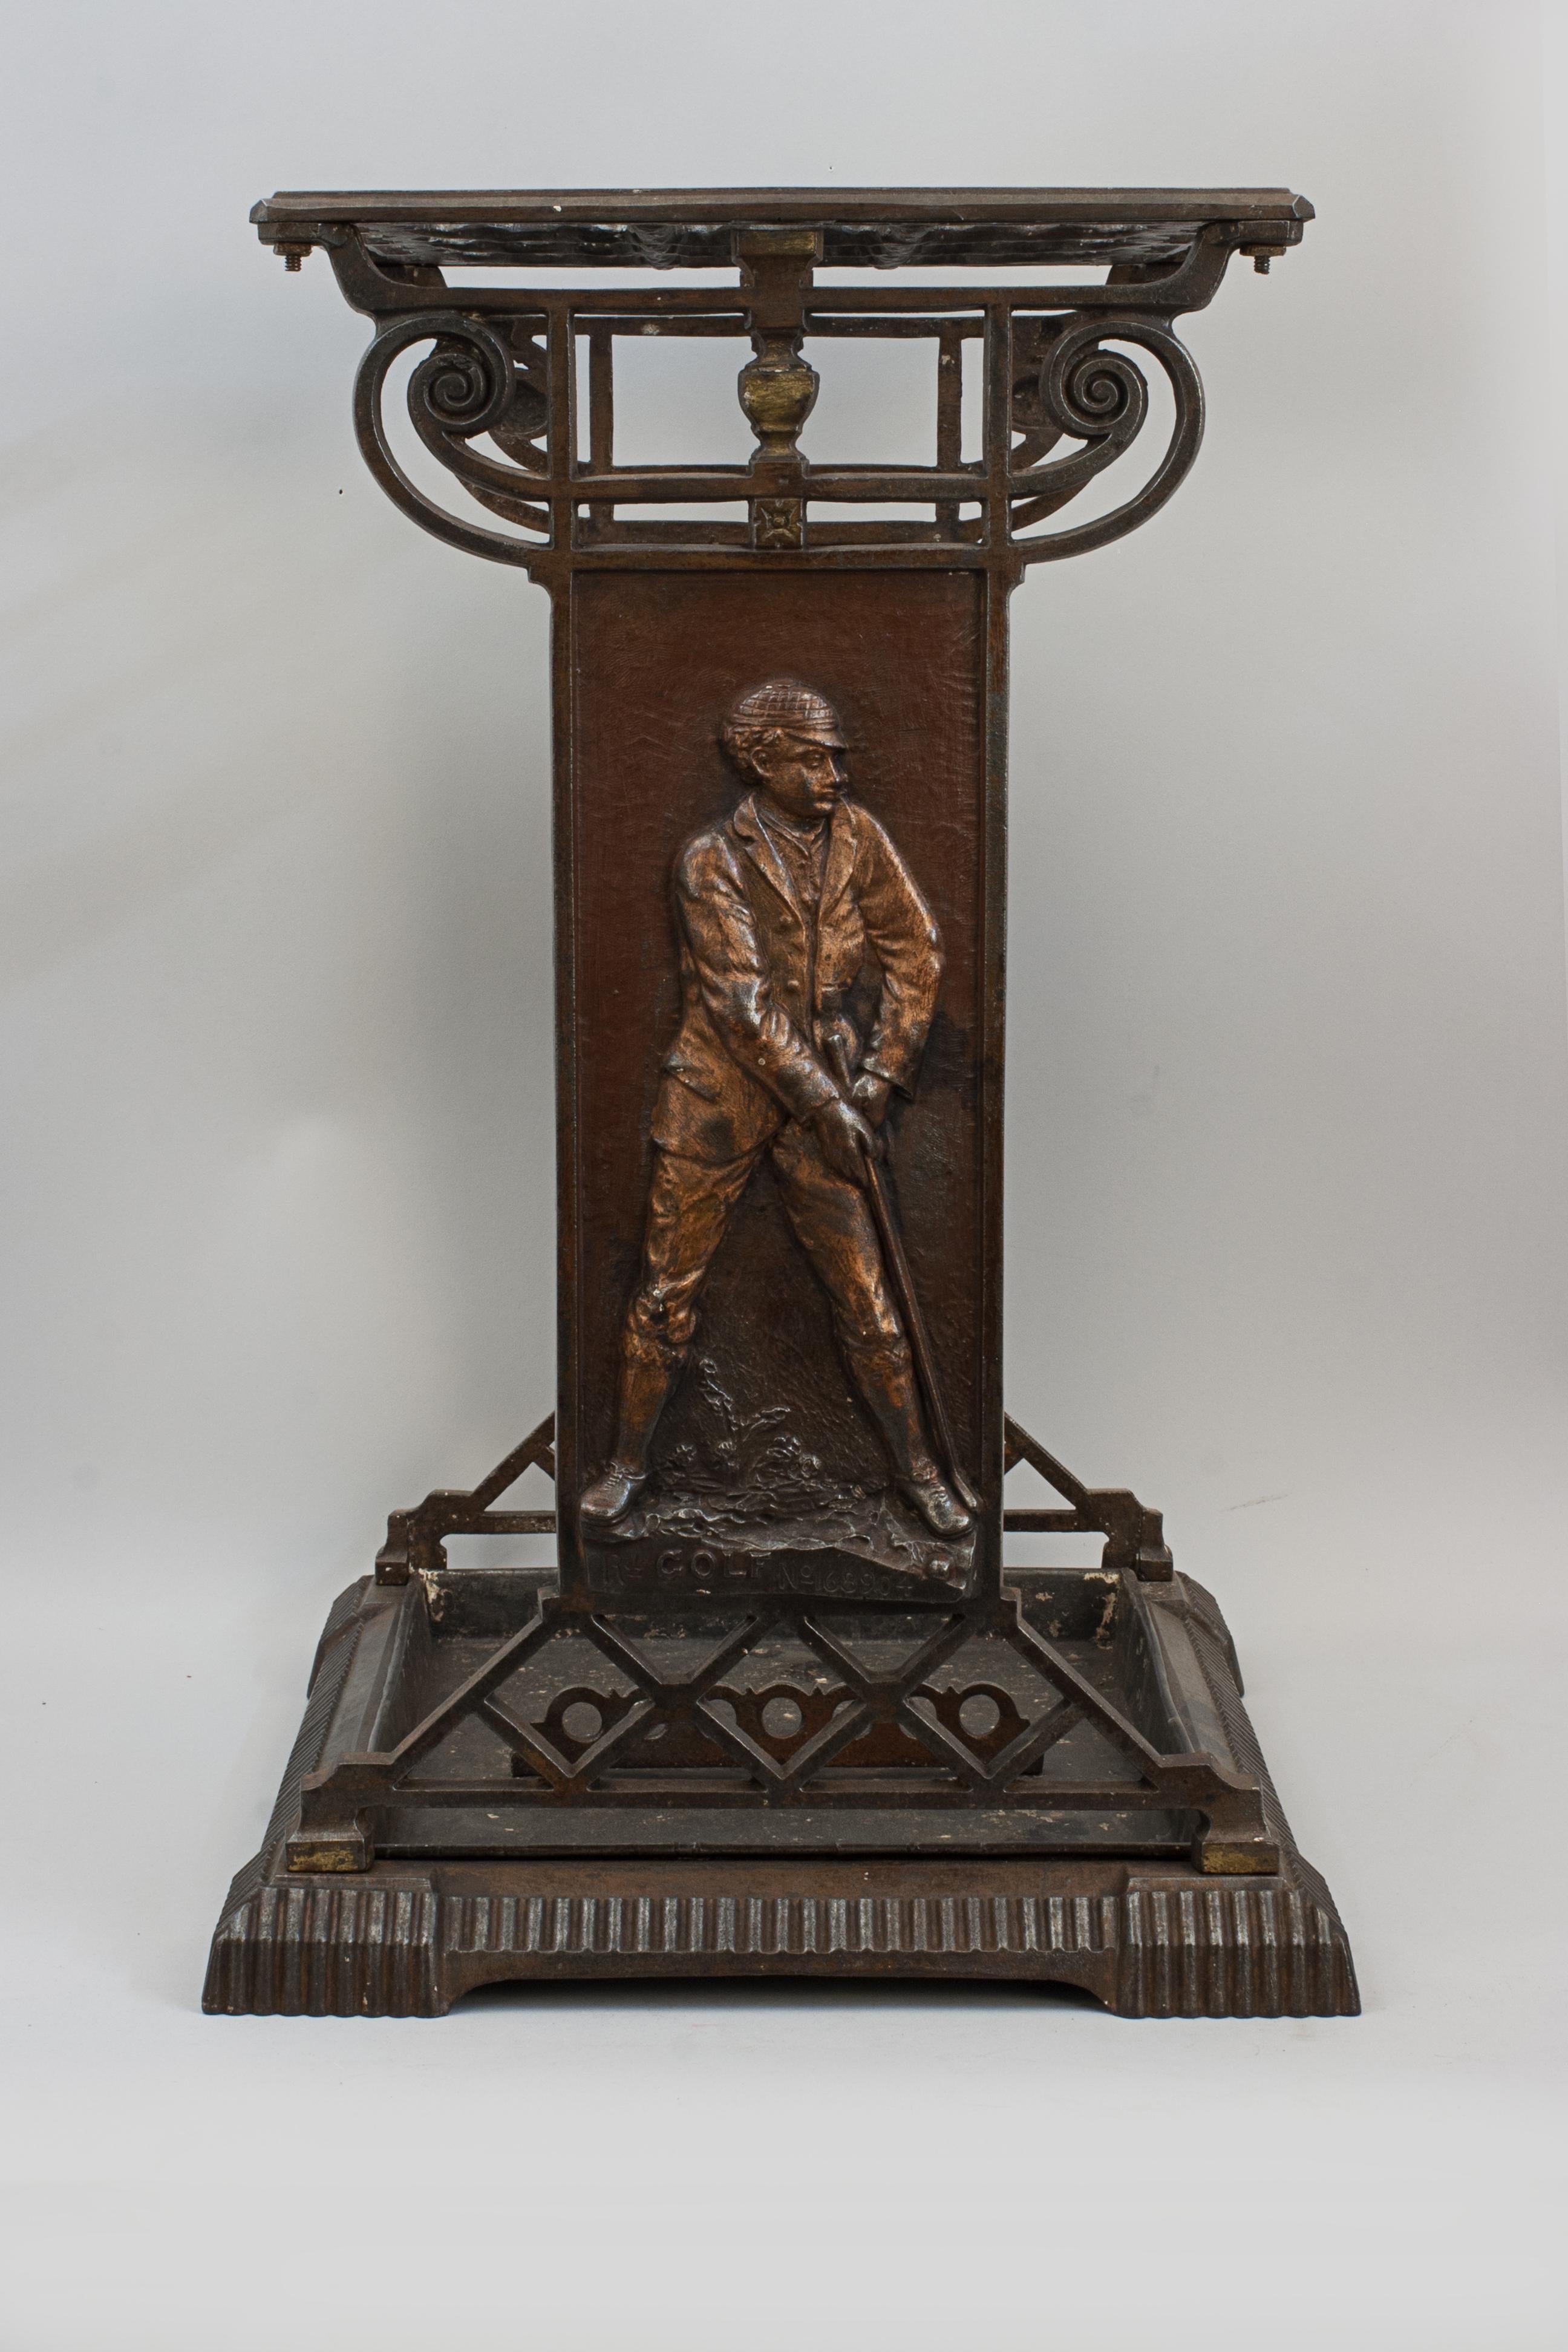 Cast Iron Umbrella Stand With Golf Figure For Sale 1